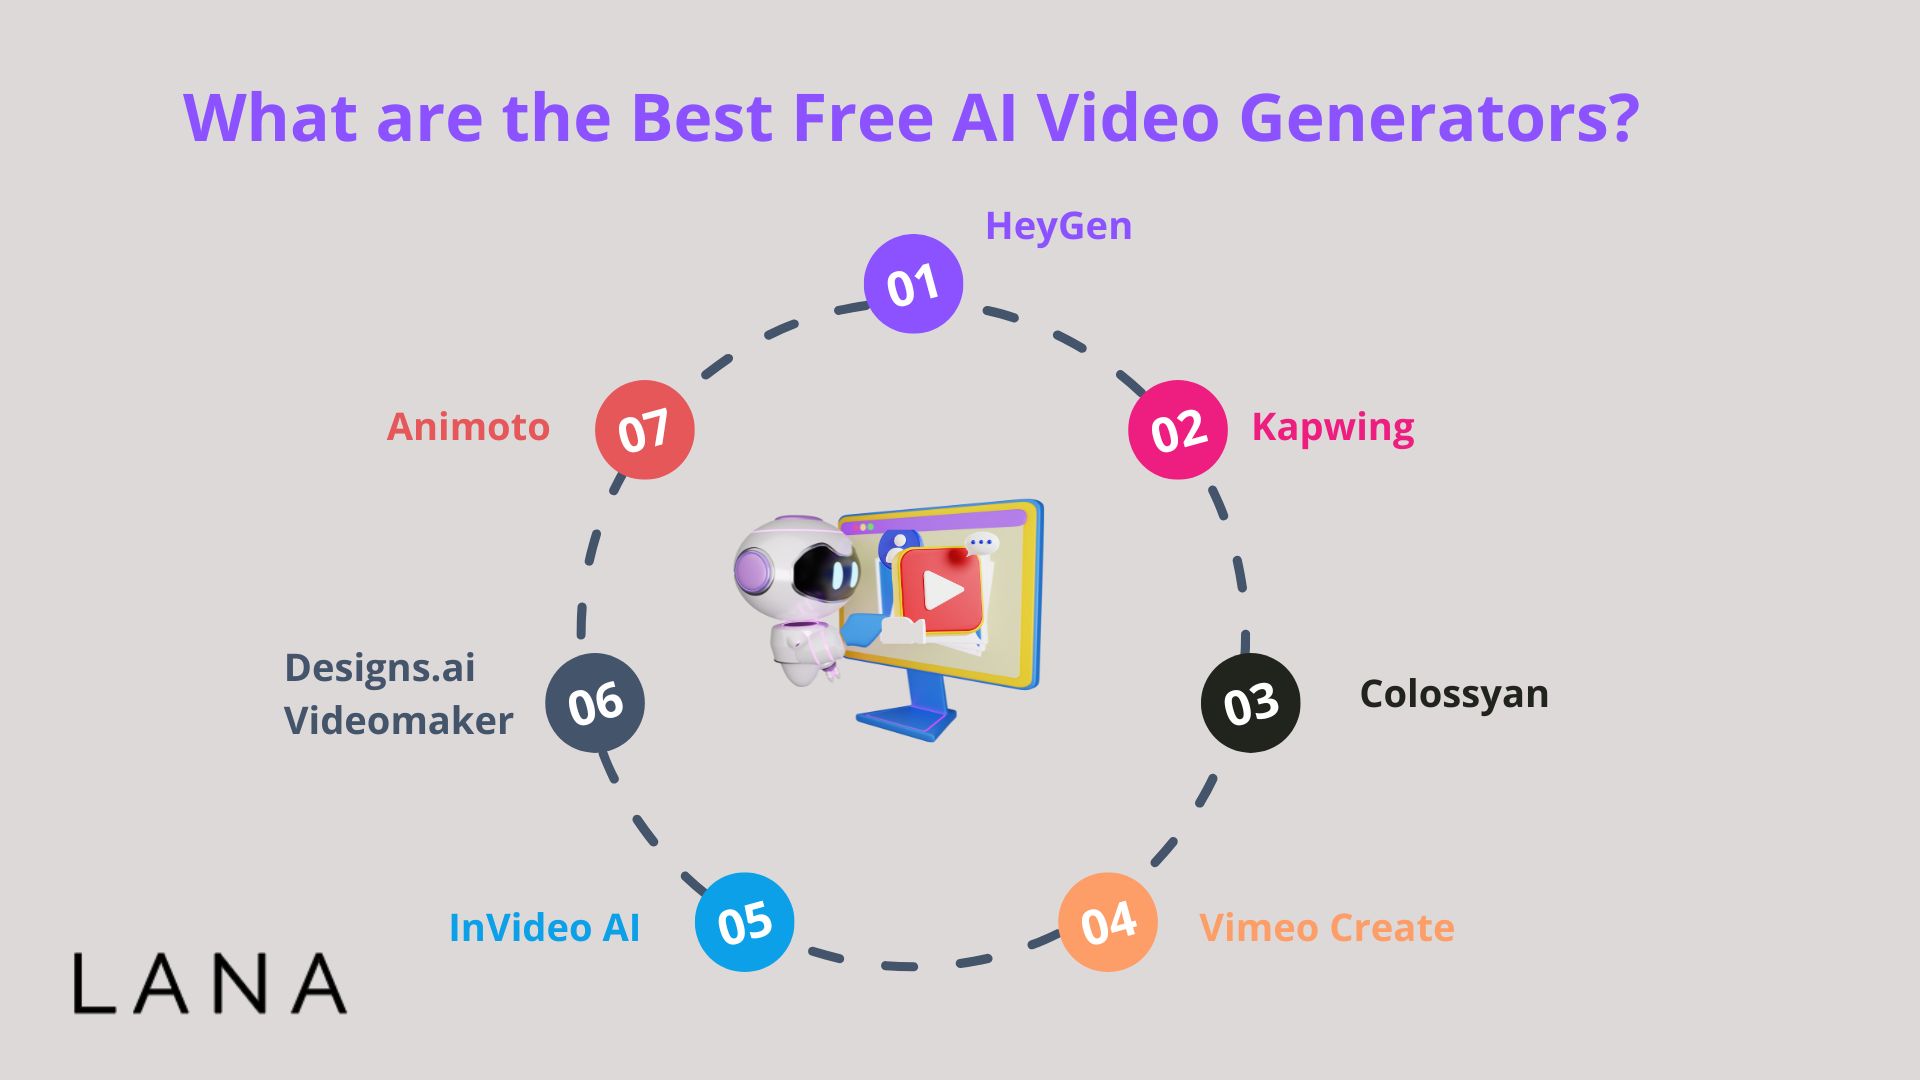 What are the Best Free AI Video Generators?